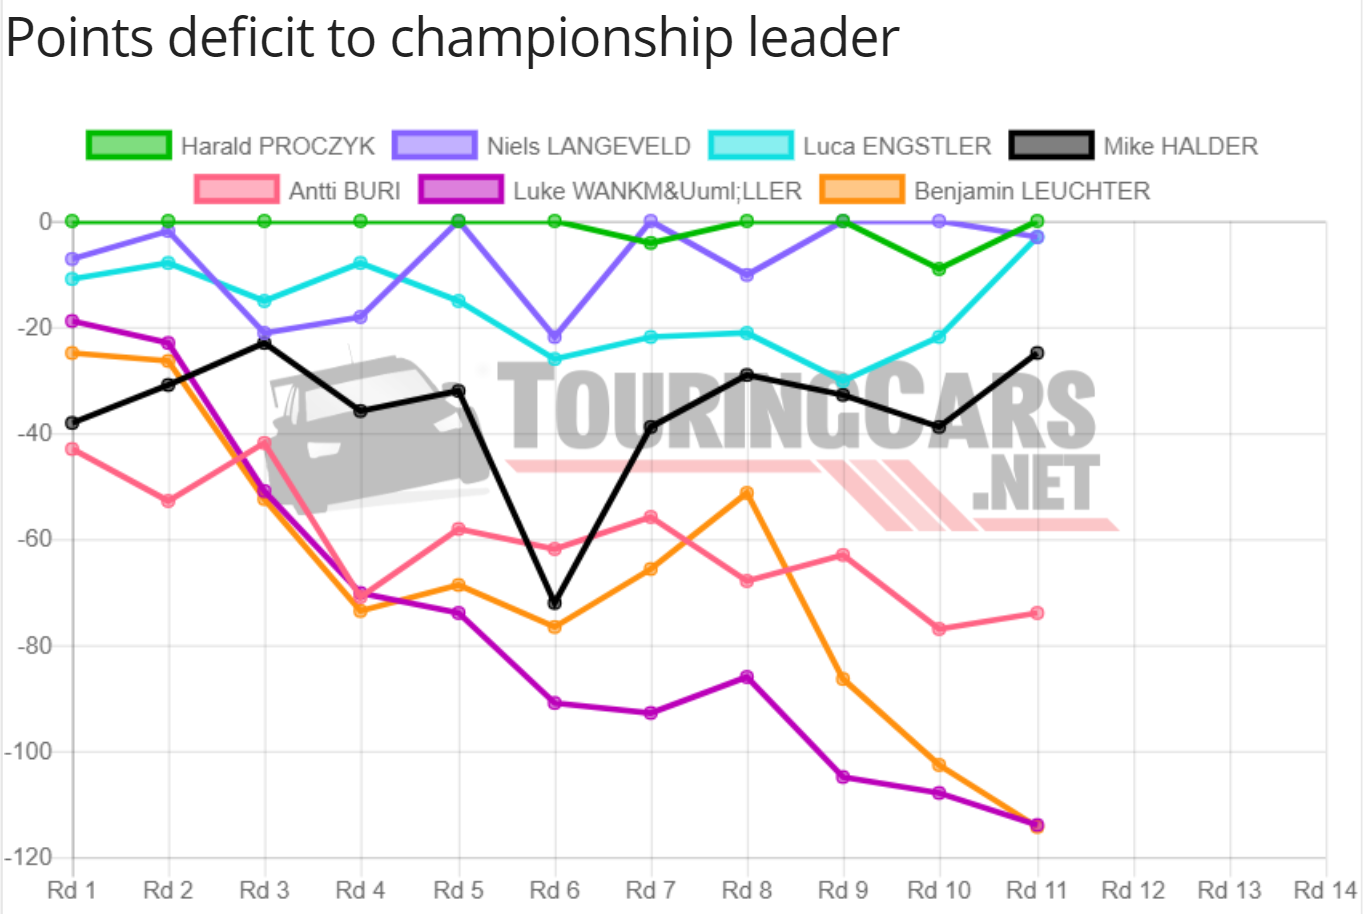 TCR Germany points deficit graphic